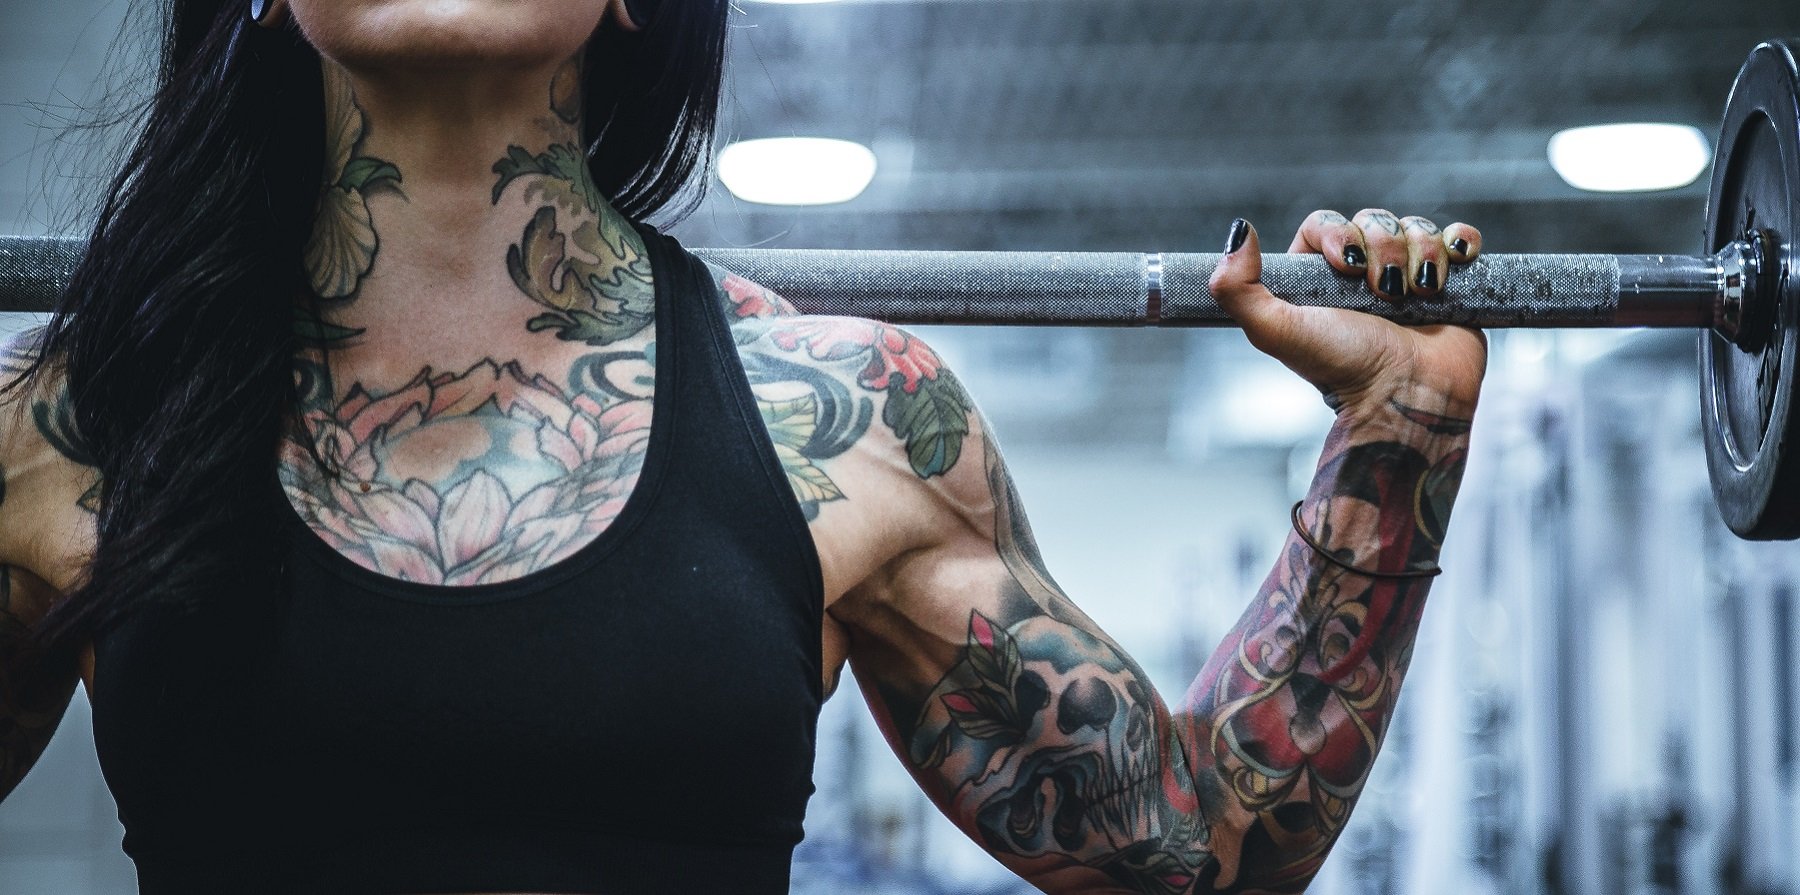 Torso of woman with tattoos holding barbell on shoulders